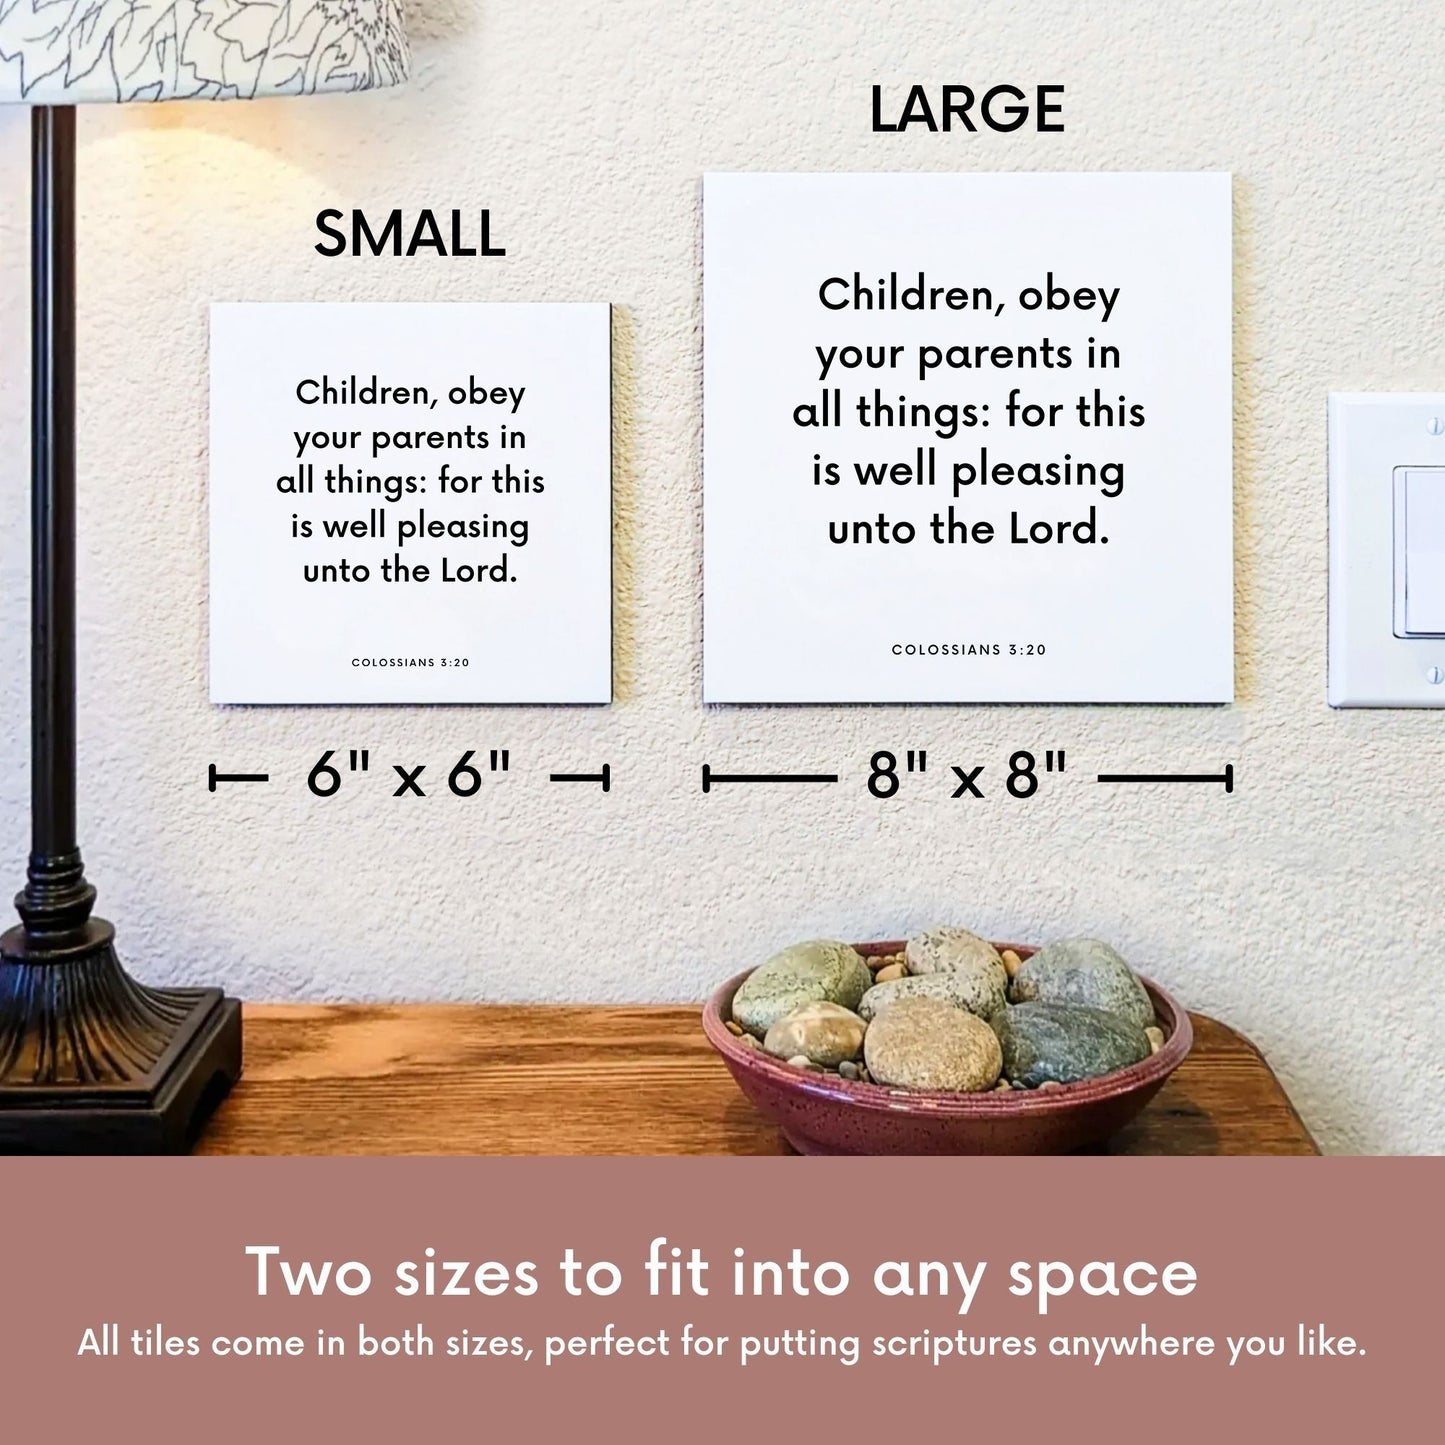 Scripture tile size comparison for Colossians 3:20 - "Children, obey your parents in all things"